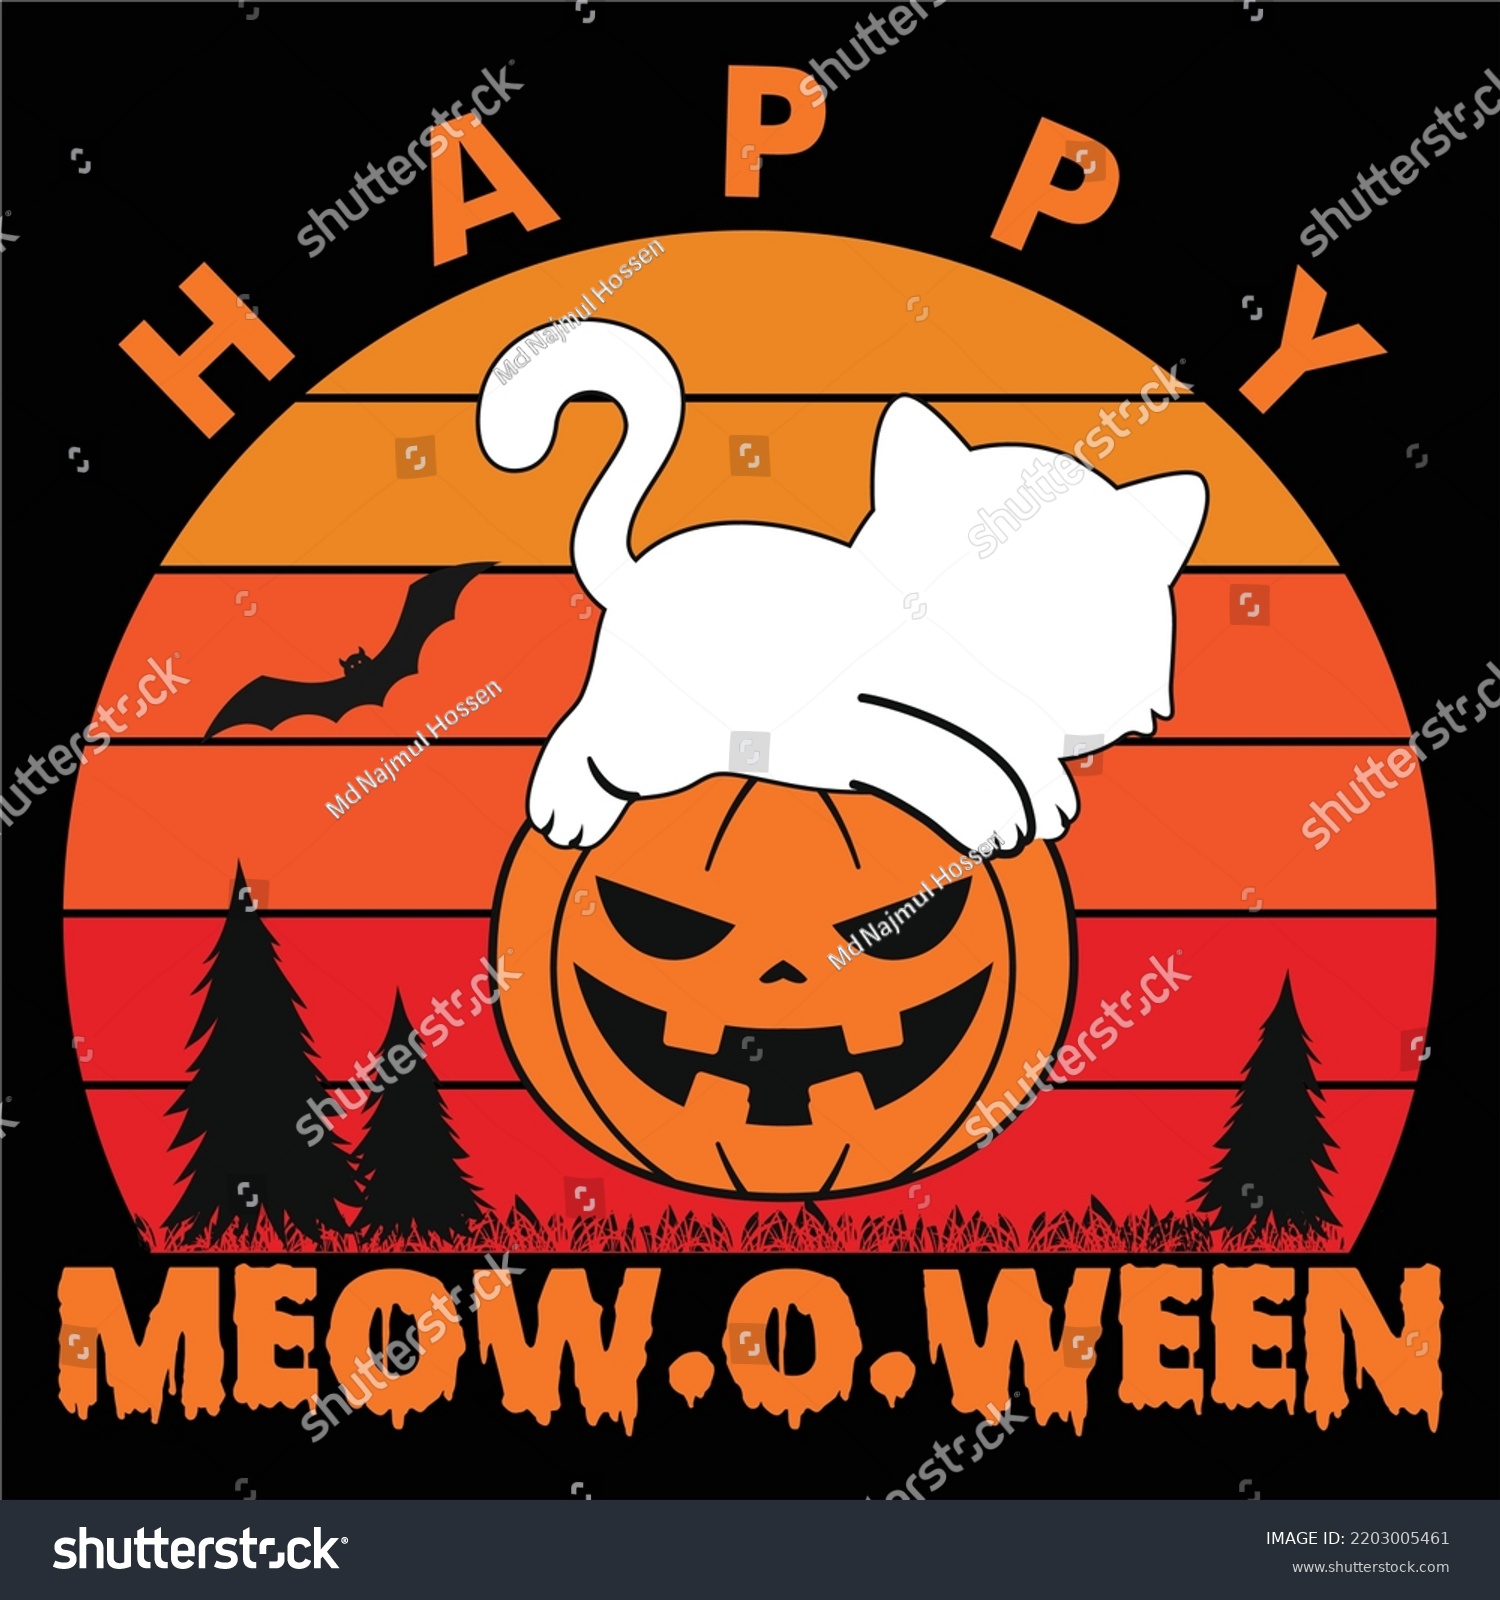 SVG of Happy Meow. O, Ween, Happy Halloween Shirt Print Template, Witch Bat Cat Scary House Dark Green Riper Boo Squad Grave Pumpkin Skeleton Spooky Trick Or Treat svg